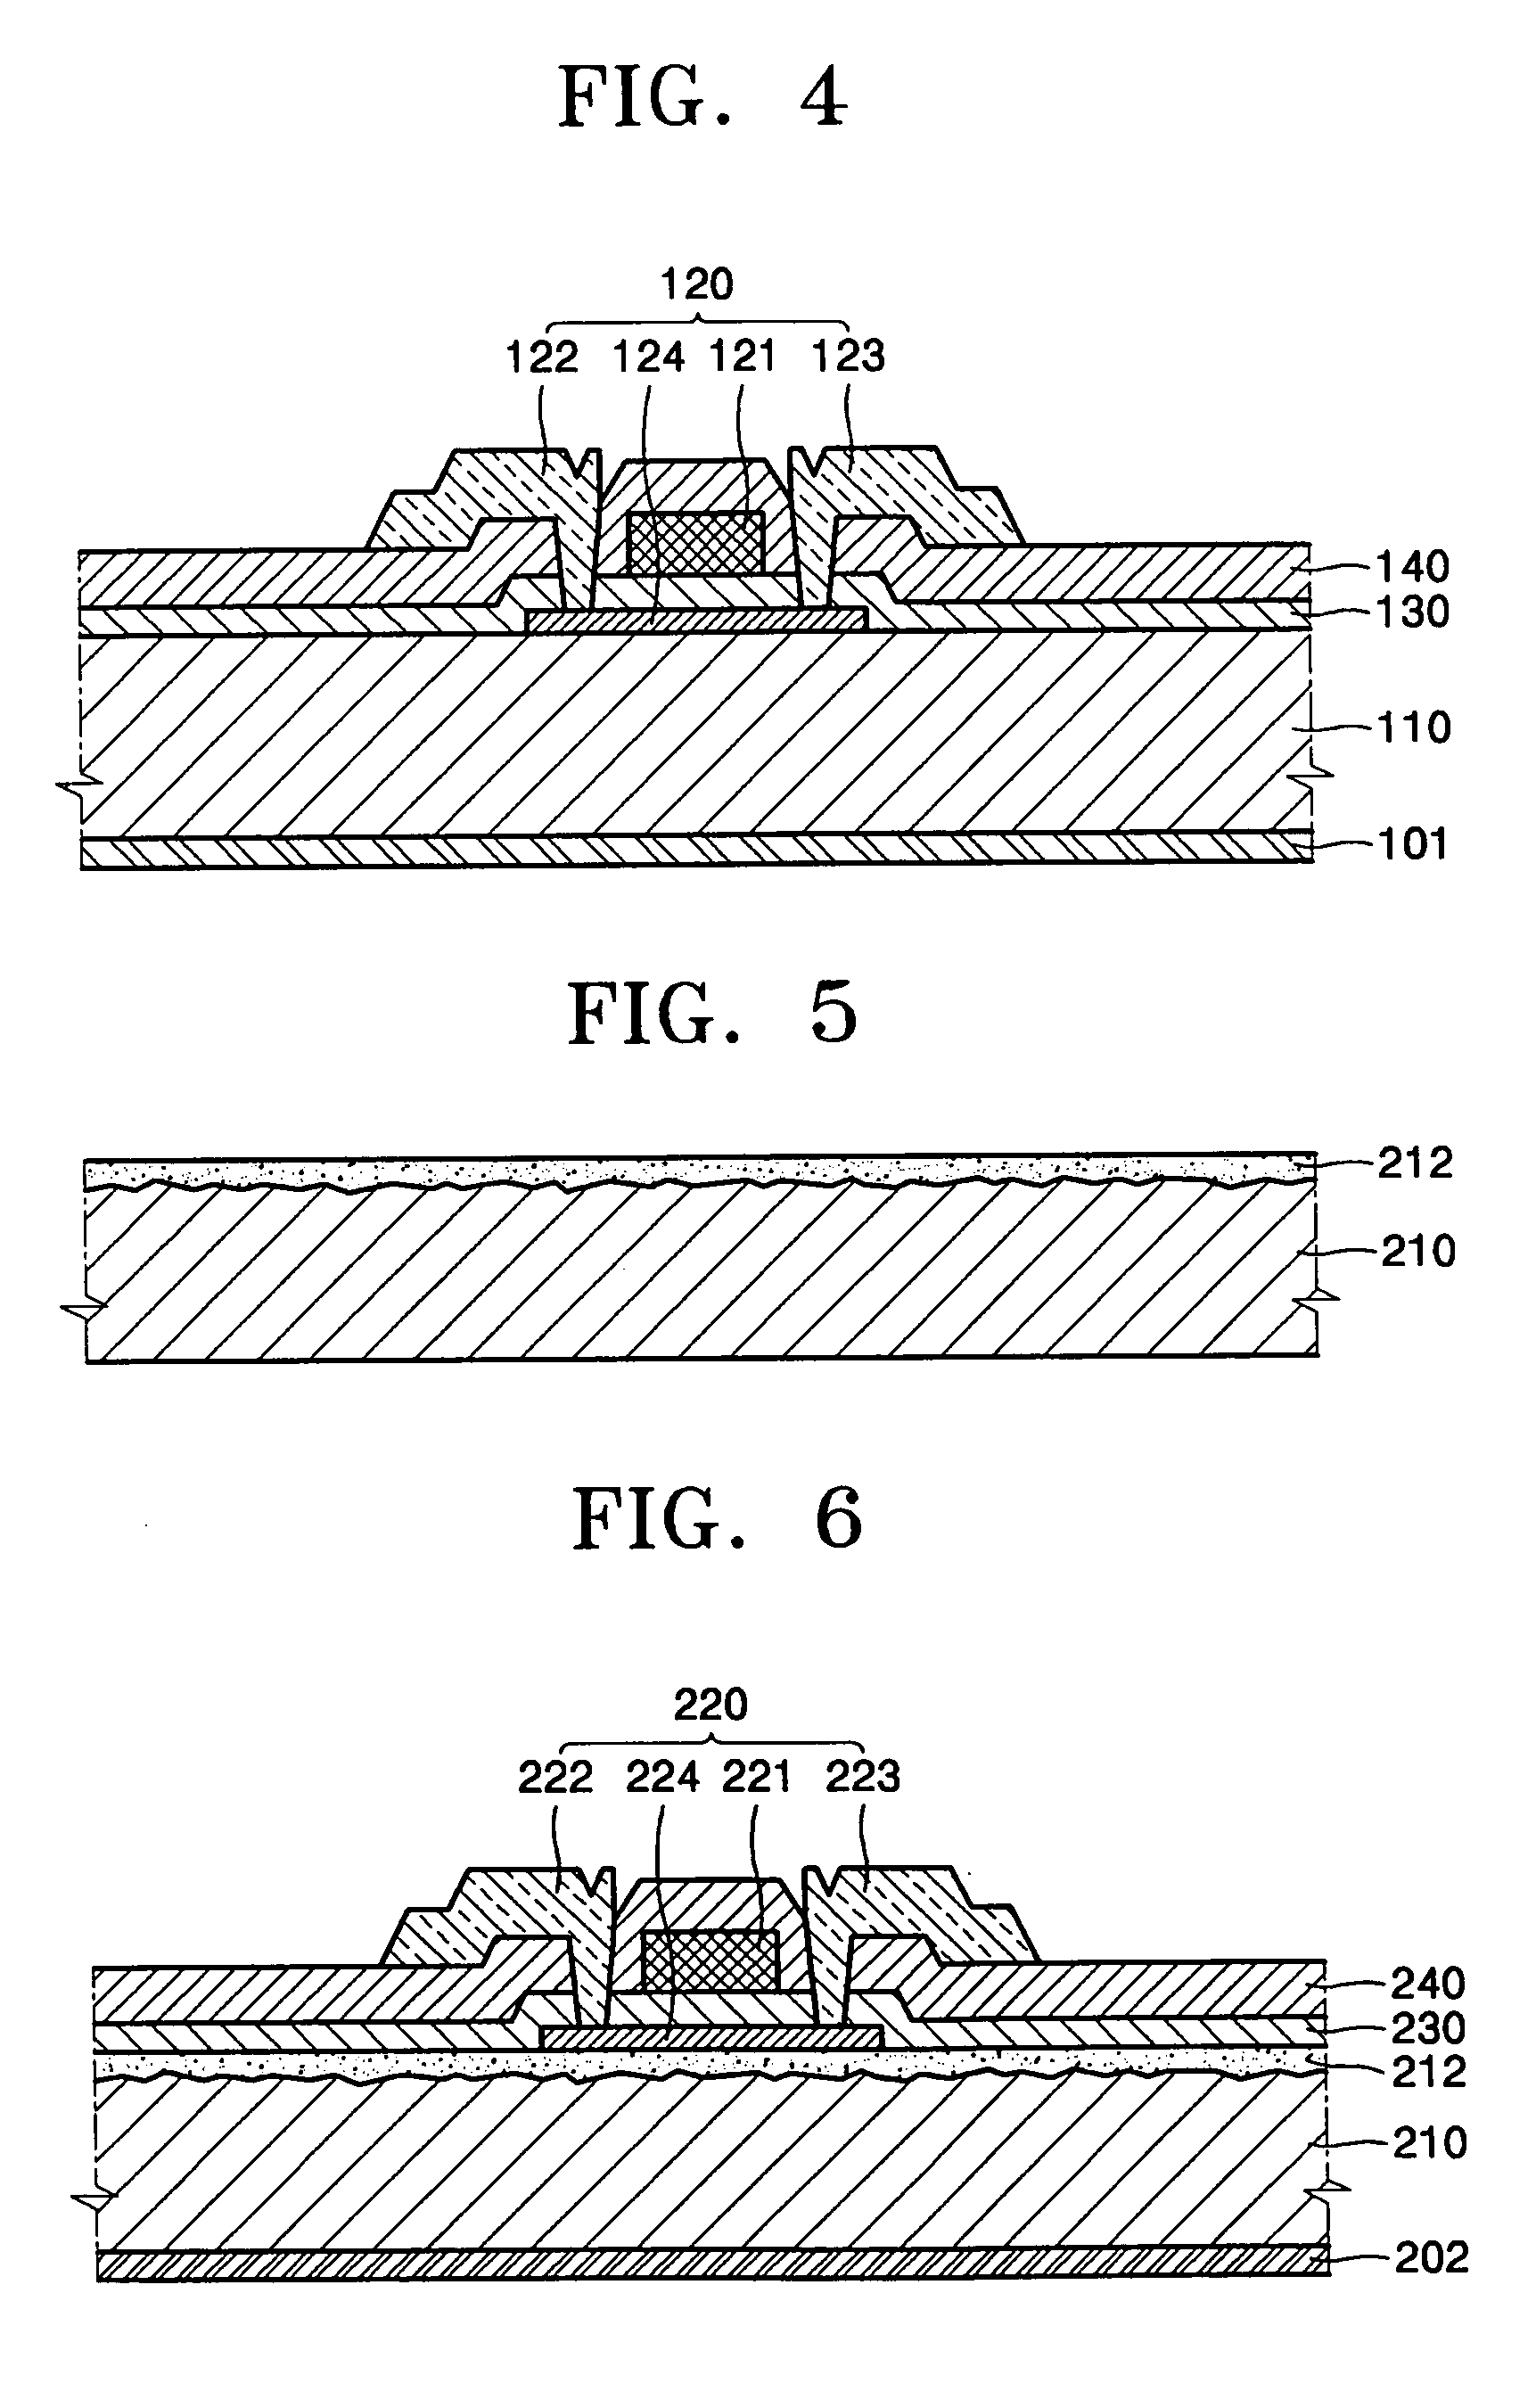 Preventing substrate deformation